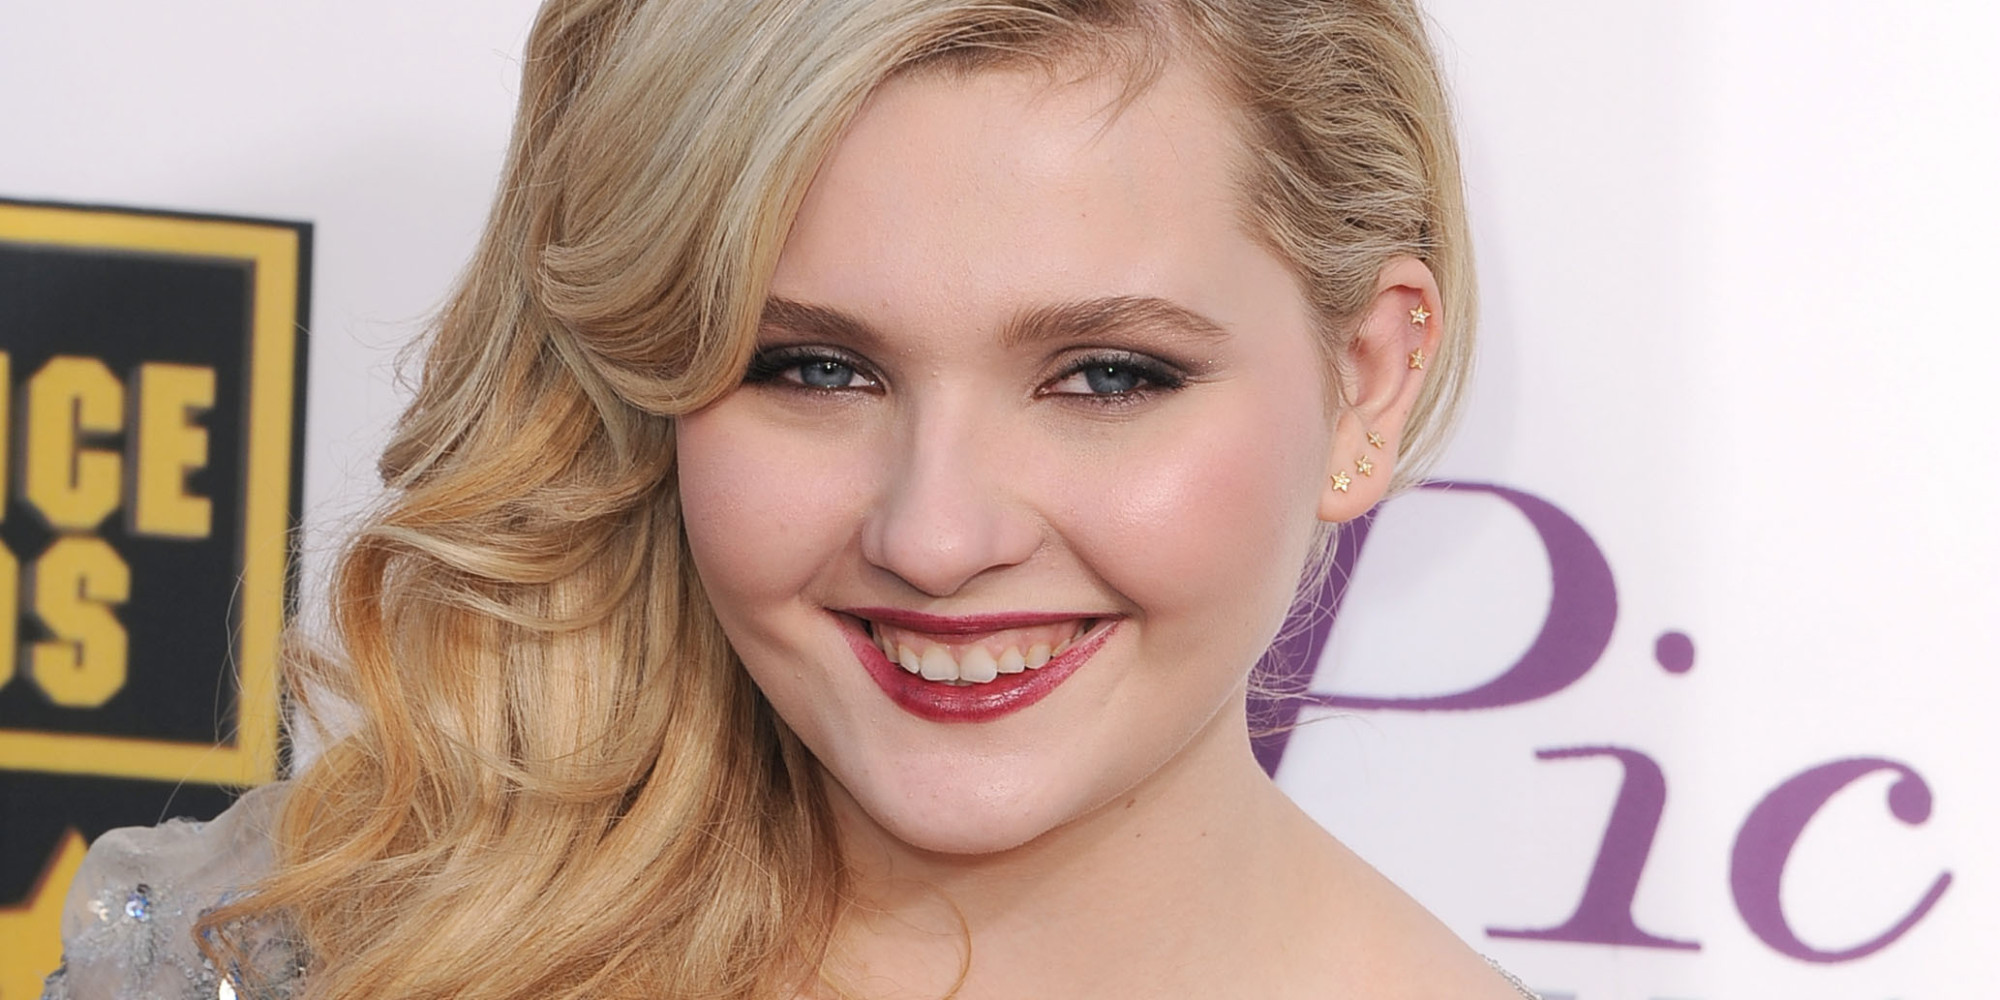 Abigail Breslin Looks All Grown Up In A LowCut Dress At The Critics